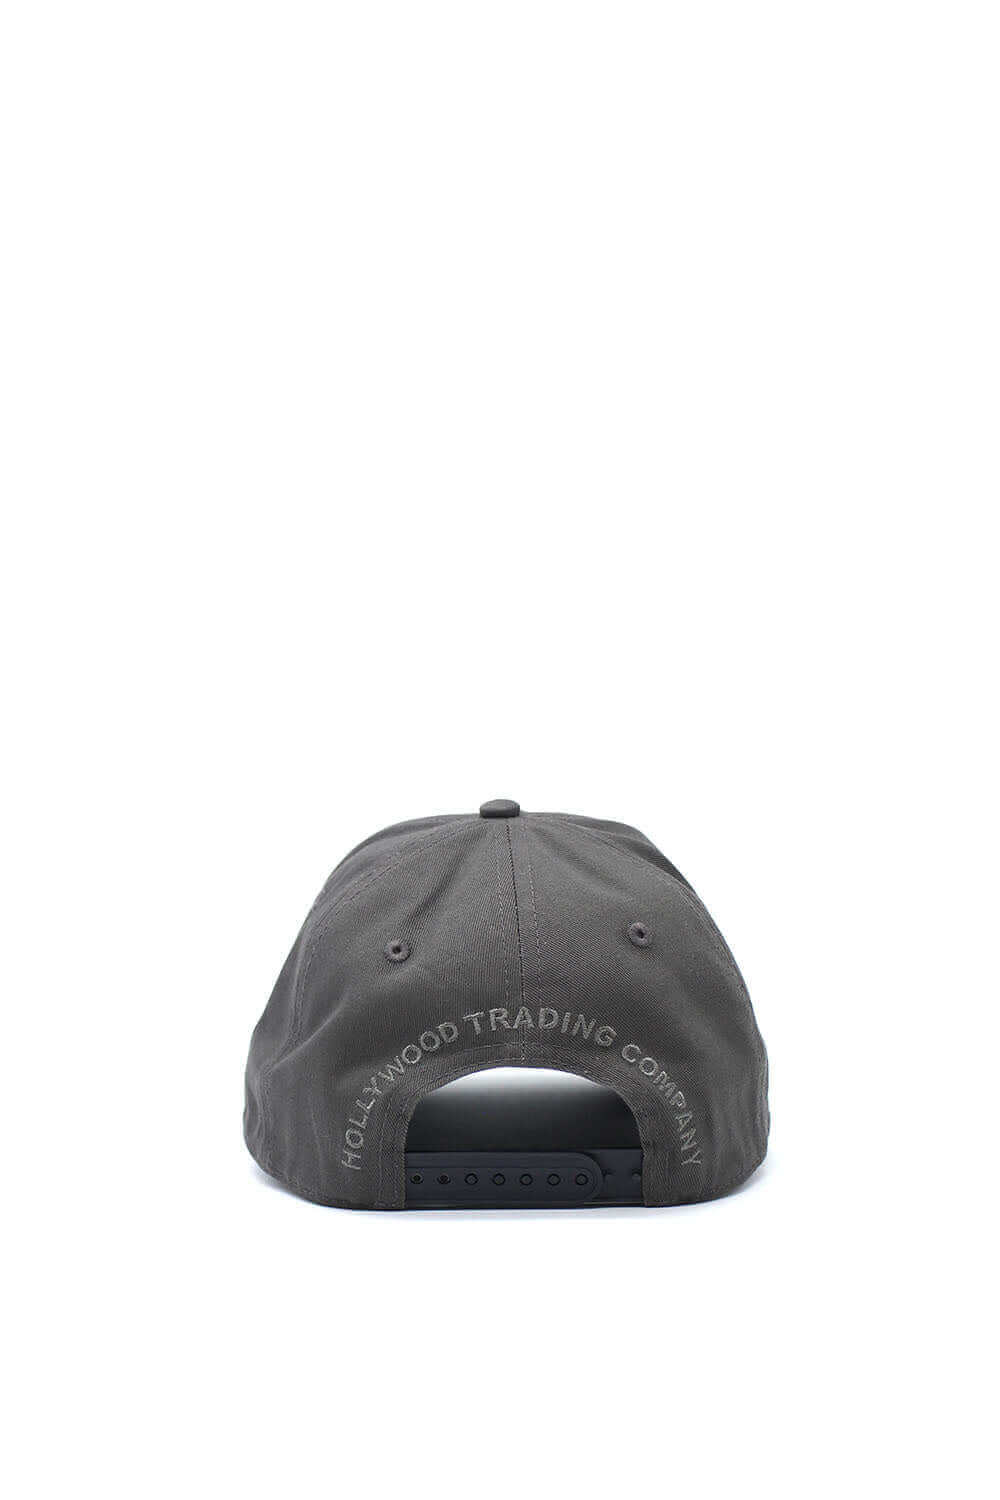 HOLLYWOOD T.C. CAP Grey baseball cap , round crown with eyelets , Hollywood T.C. logo embroidered on the front, adjustable strap on the back. One size fits all. 100% cotton. HTC LOS ANGELES